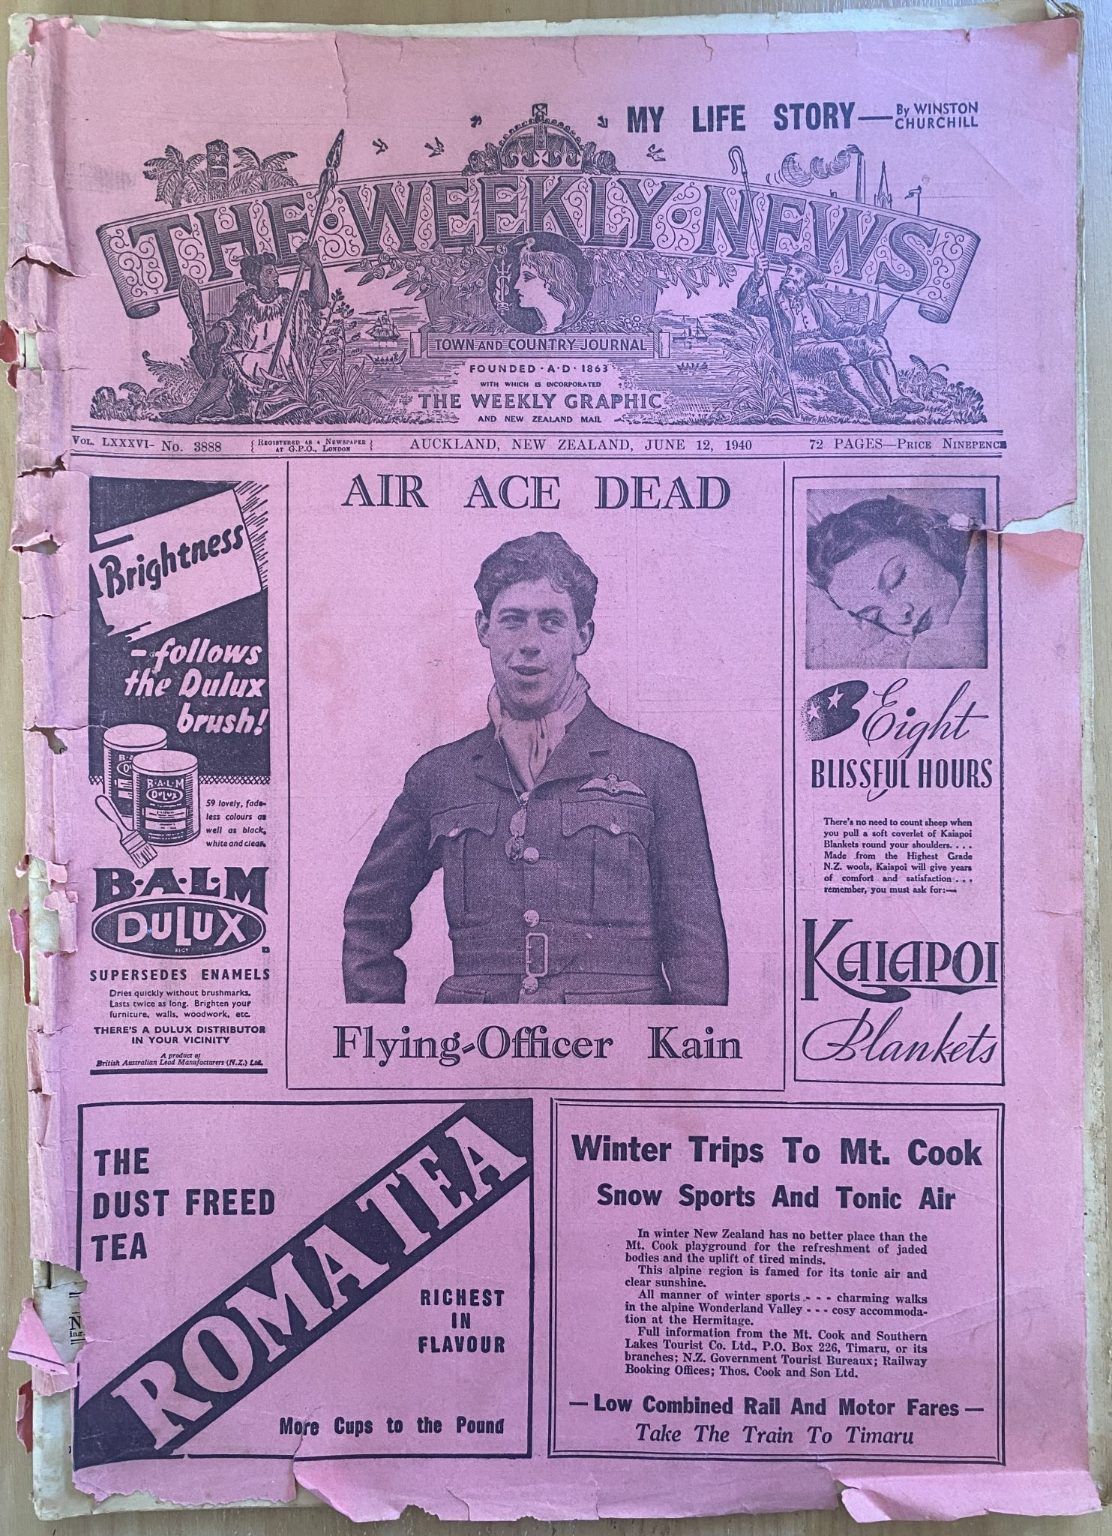 OLD NEWSPAPER: The Weekly News - No. 3888, 12 June 1940